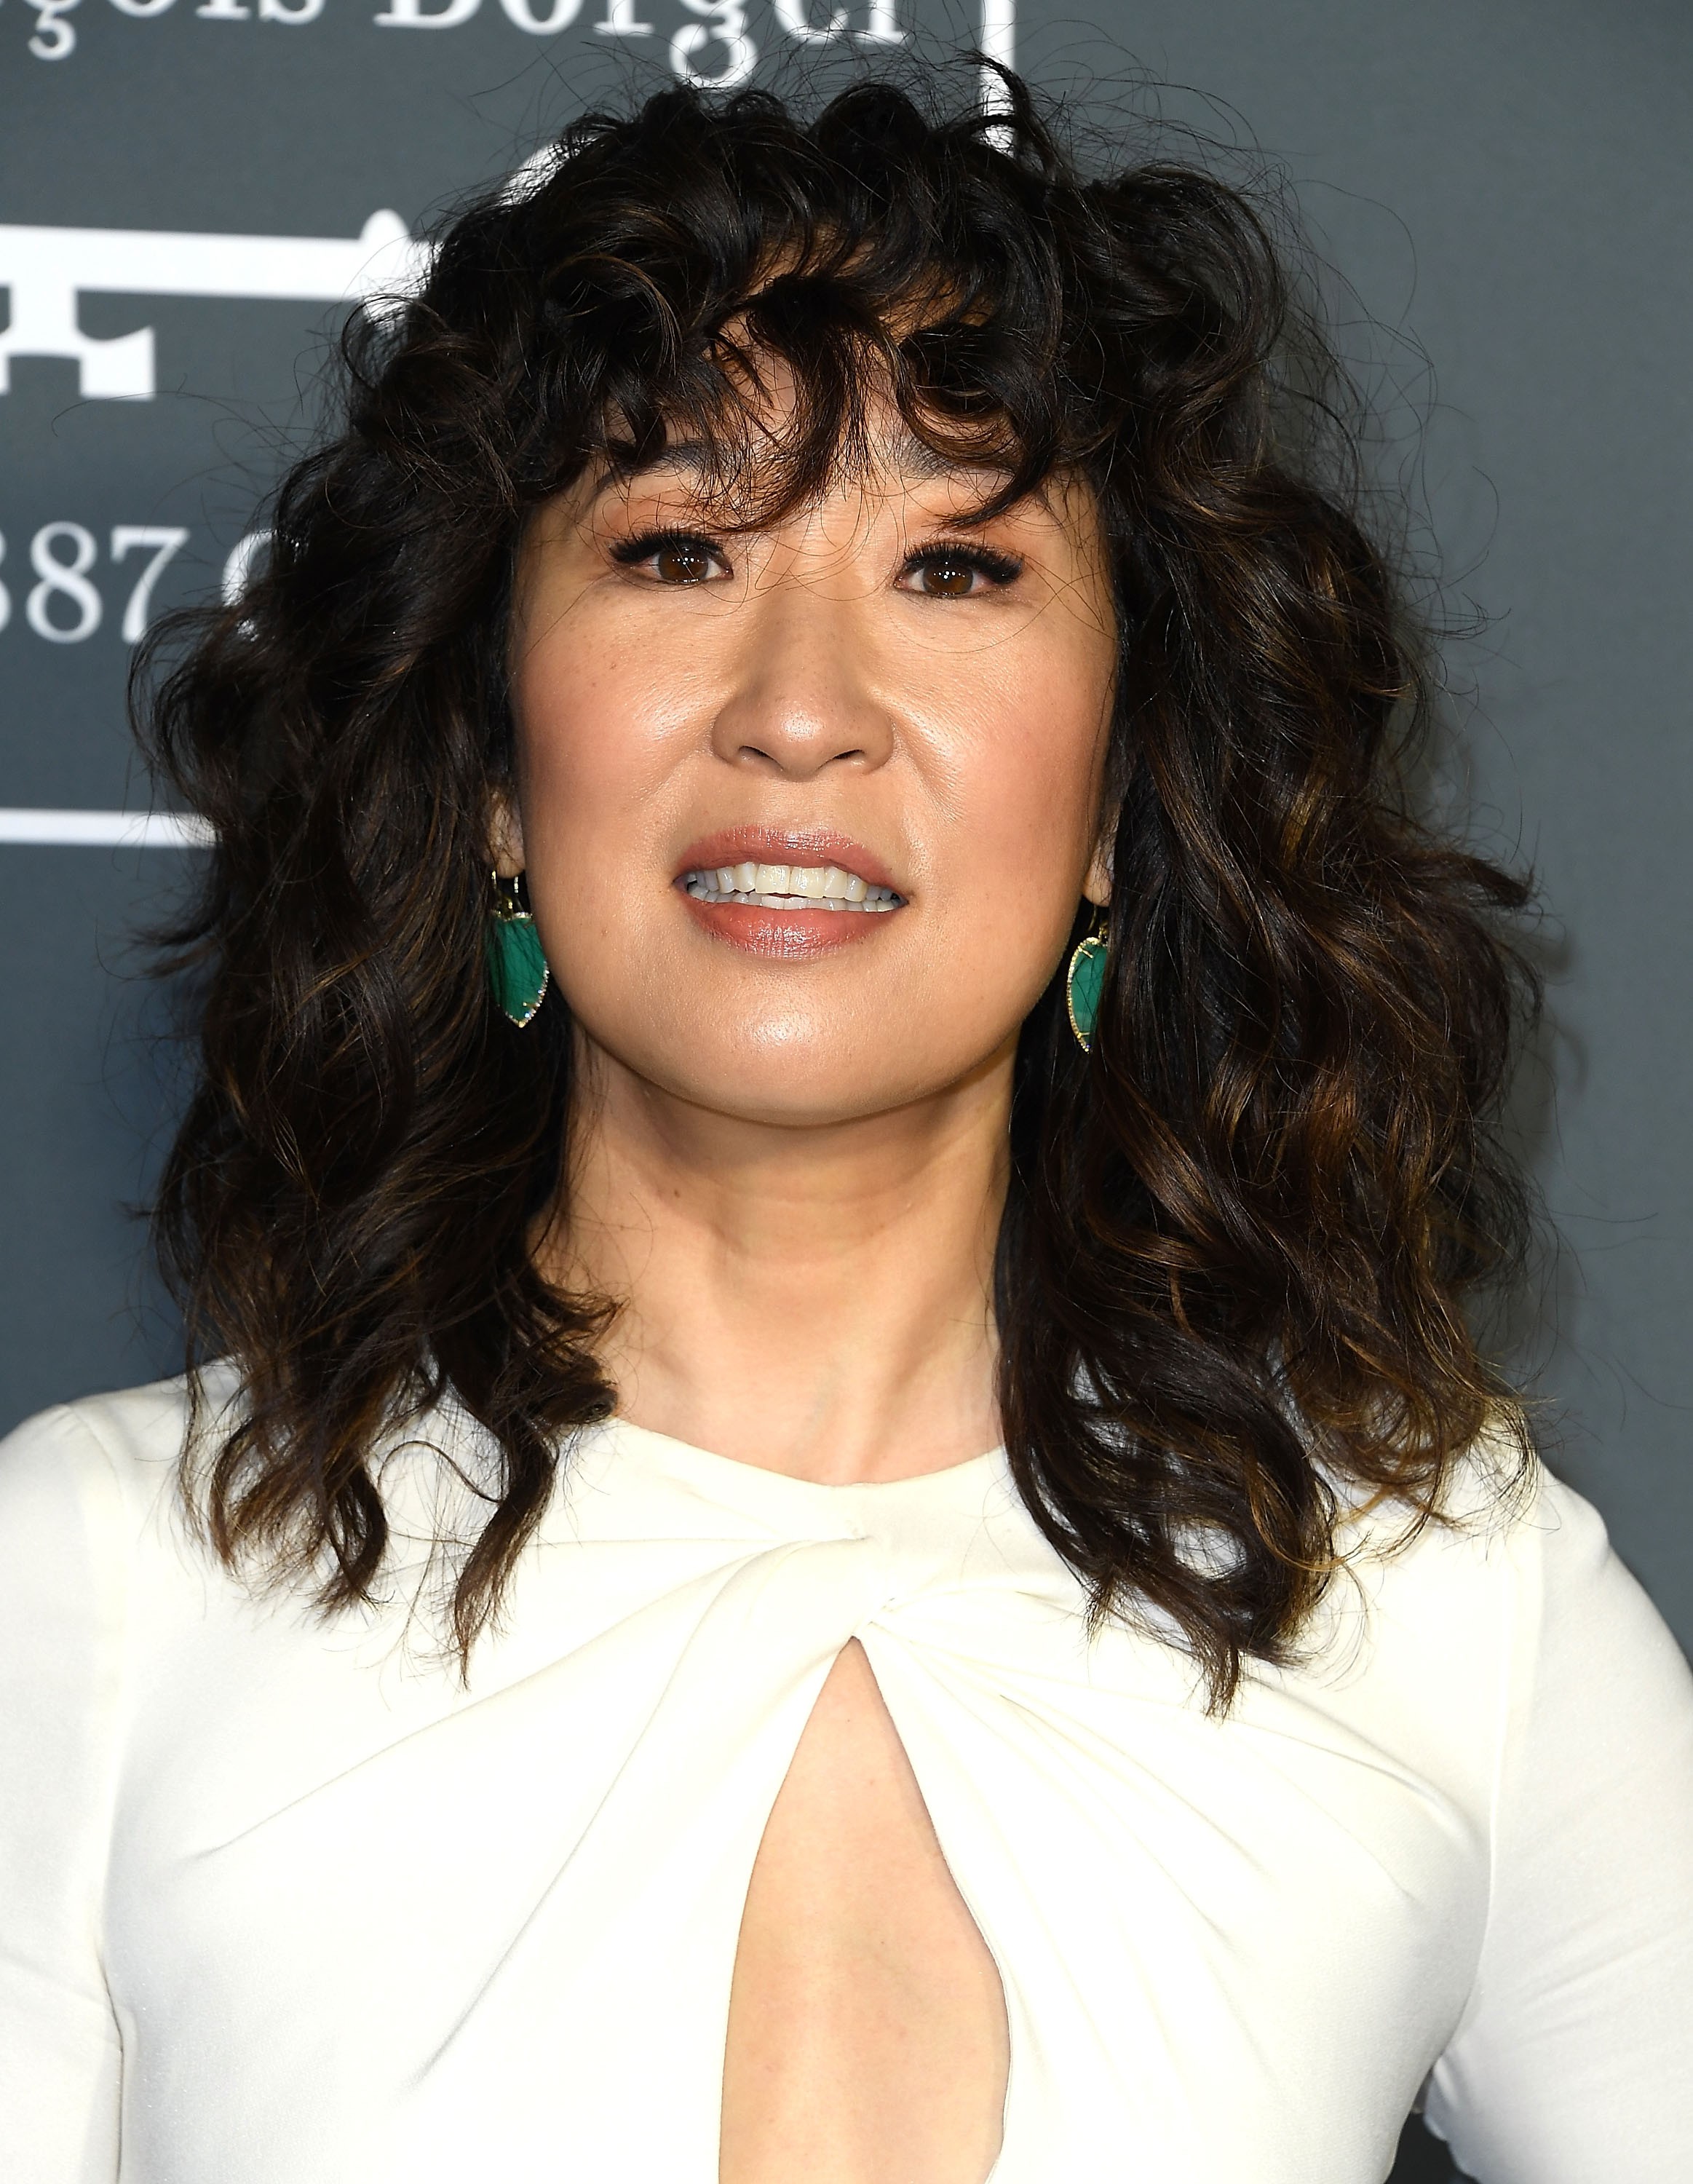 SANTA MONICA, CA - JANUARY 13:  Sandra Oh arrives at the The 24th Annual Critics' Choice Awards  attends The 24th Annual Critics' Choice Awards at Barker Hangar on January 13, 2019 in Santa Monica, California.  (Photo by Steve Granitz/WireImage) (Foto: WireImage)